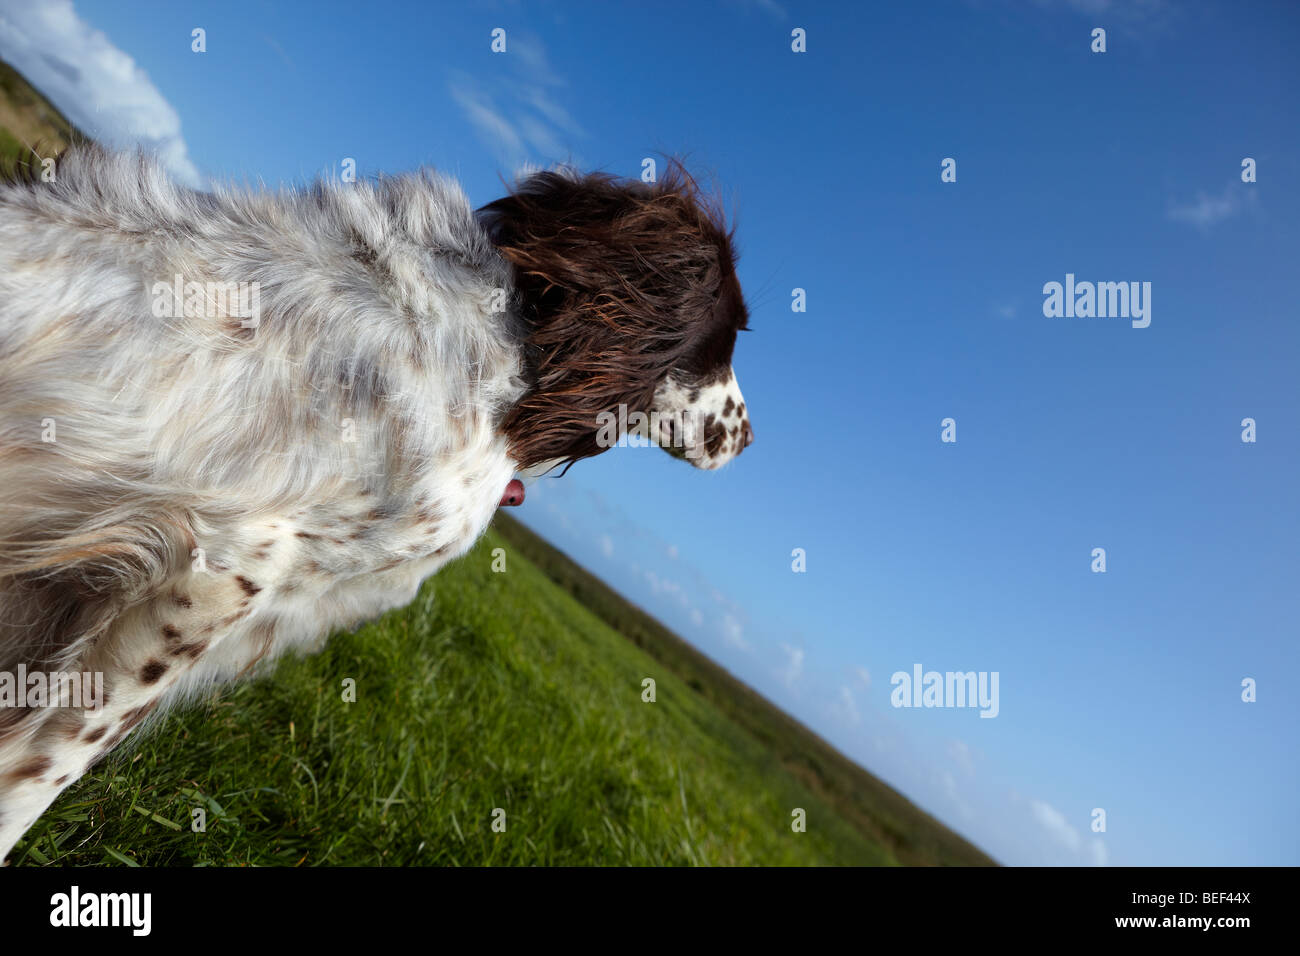 English Springer Spaniel attentively watching on a summer's day Stock Photo